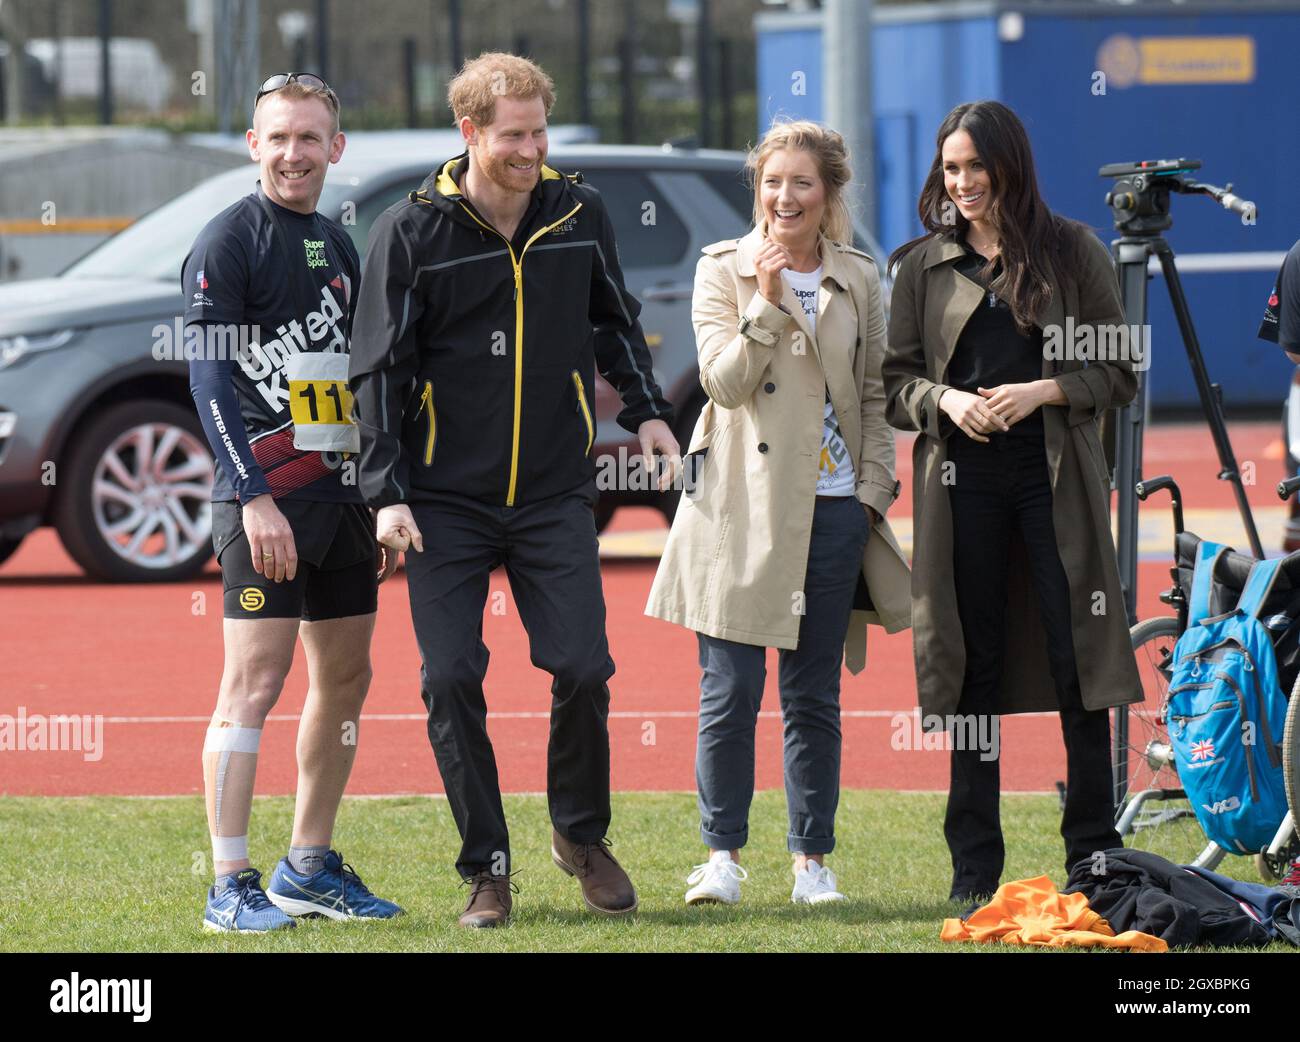 Prince Harry and Meghan Markle attend the UK team trials for the Invictus Games in Sydney 2018  at the University of Bath Sports Training Village on April 6, 2018.   The Invictus Games is the only international sports event for wounded, injured and sick servicemen and women, both serving and veteran. The Games use the power of sport to inspire recovery, support rehabilitation and generate a wider understanding and respect of all those who serve their country.  Stock Photo